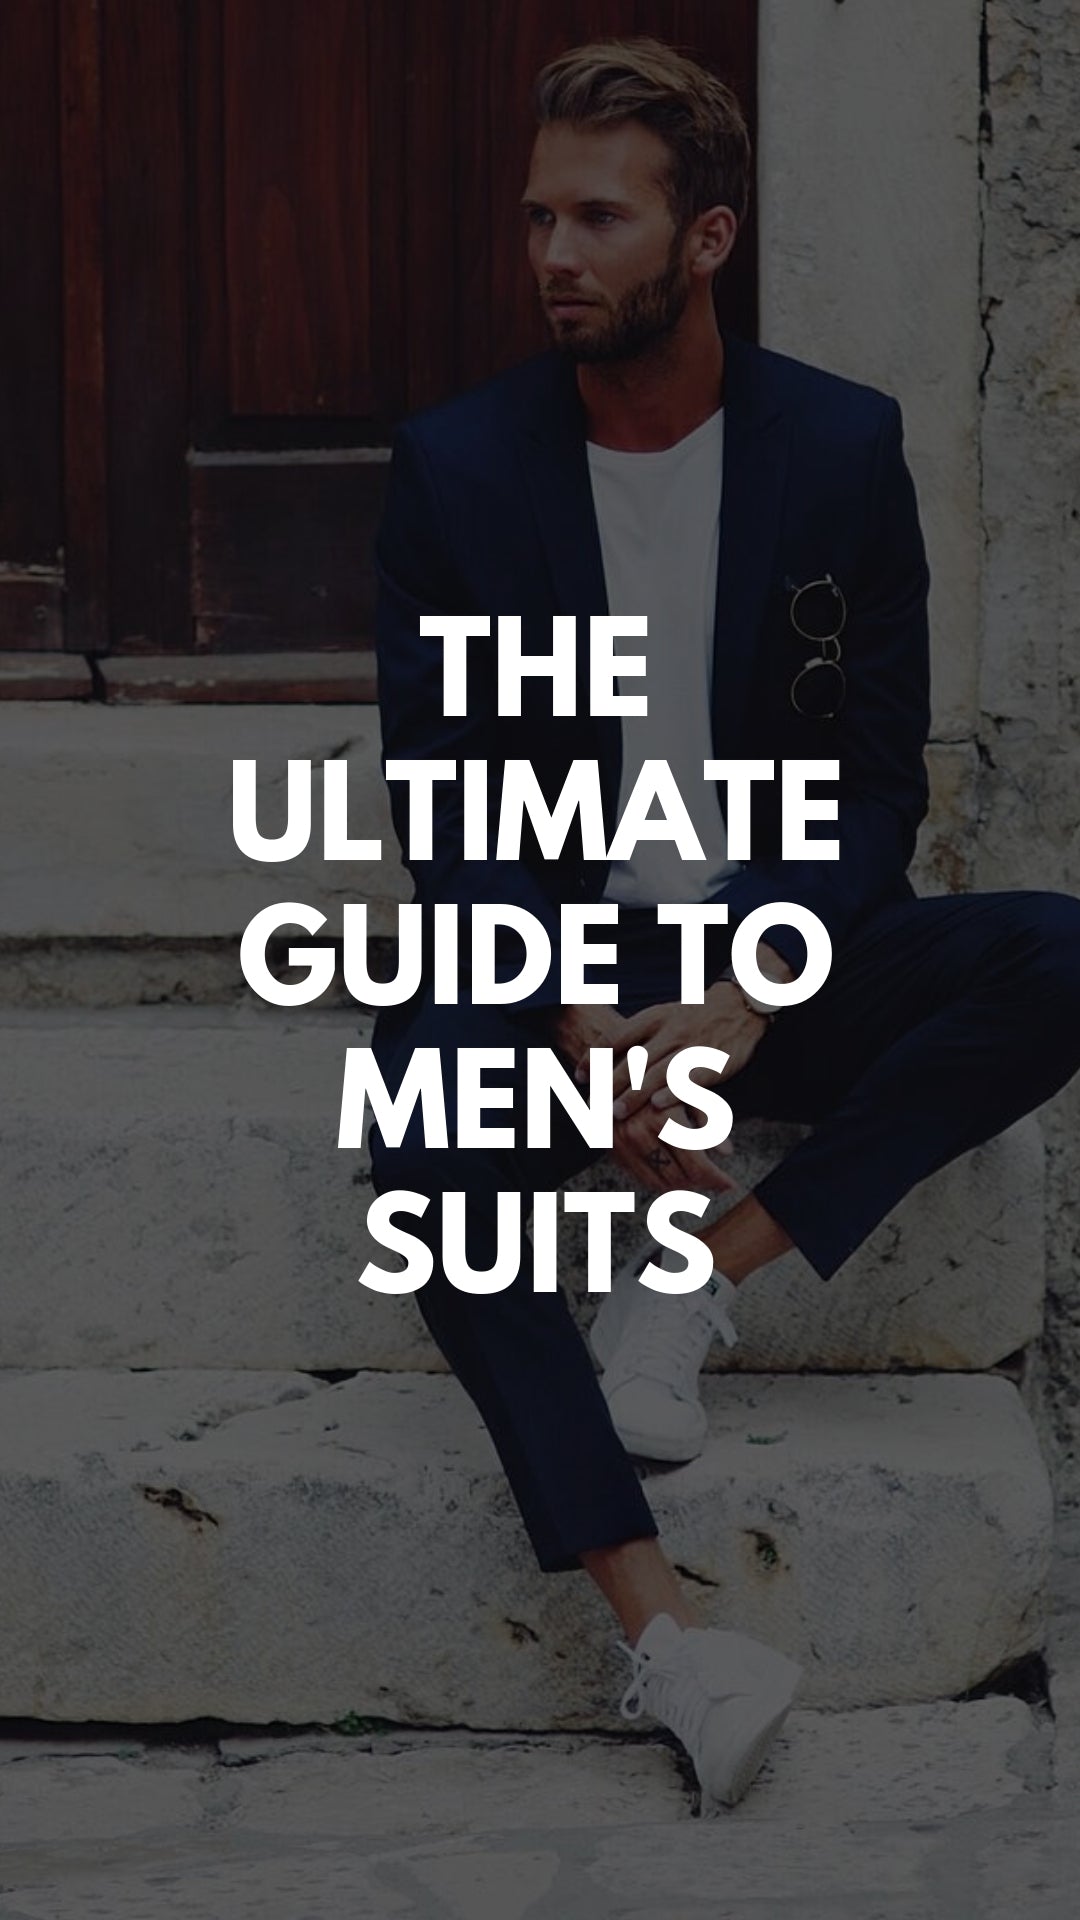 The ultimate guide to mens suits #mens #suits #formalwear #formalstyle #mensfashion #streetstyle